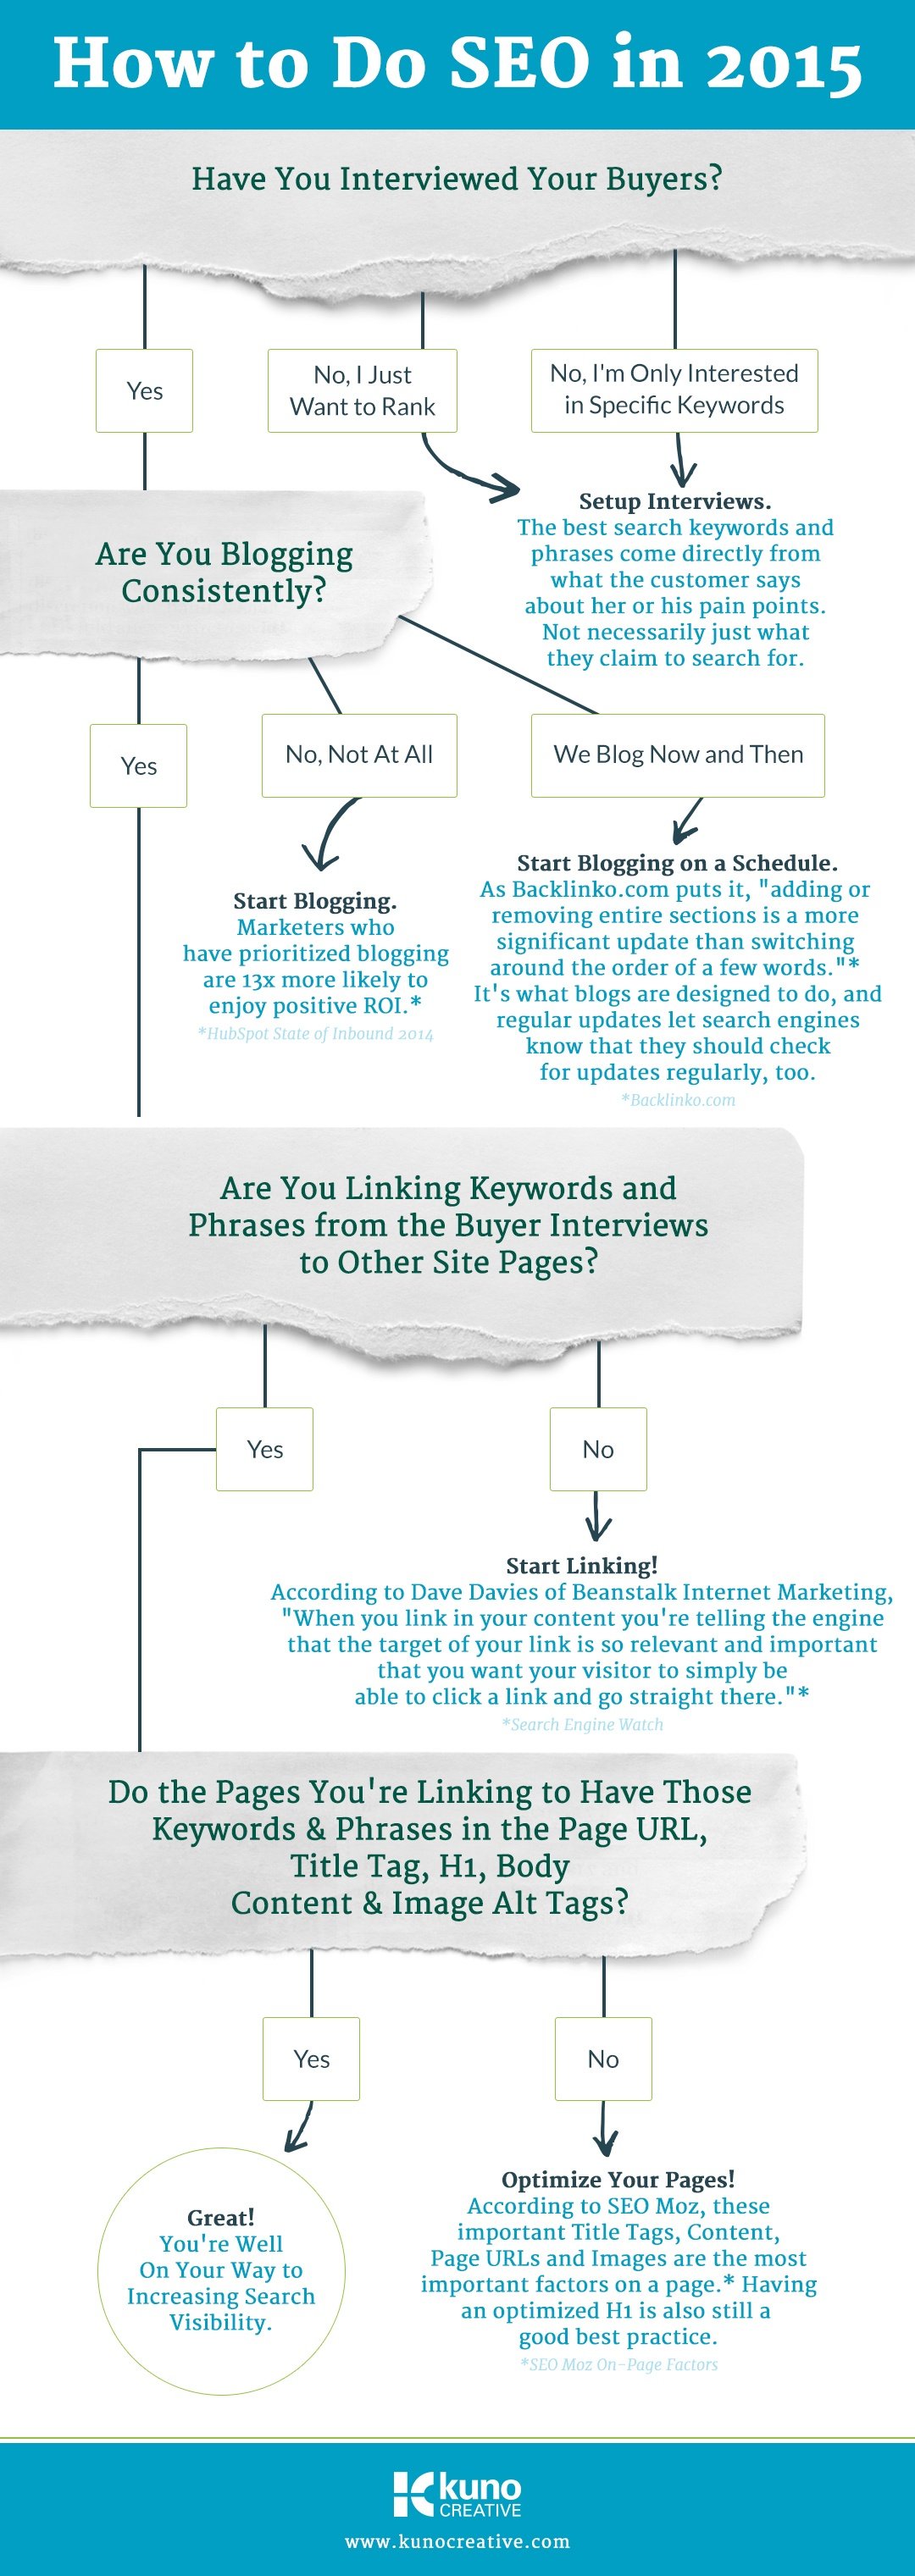 seo in 2015 infographic